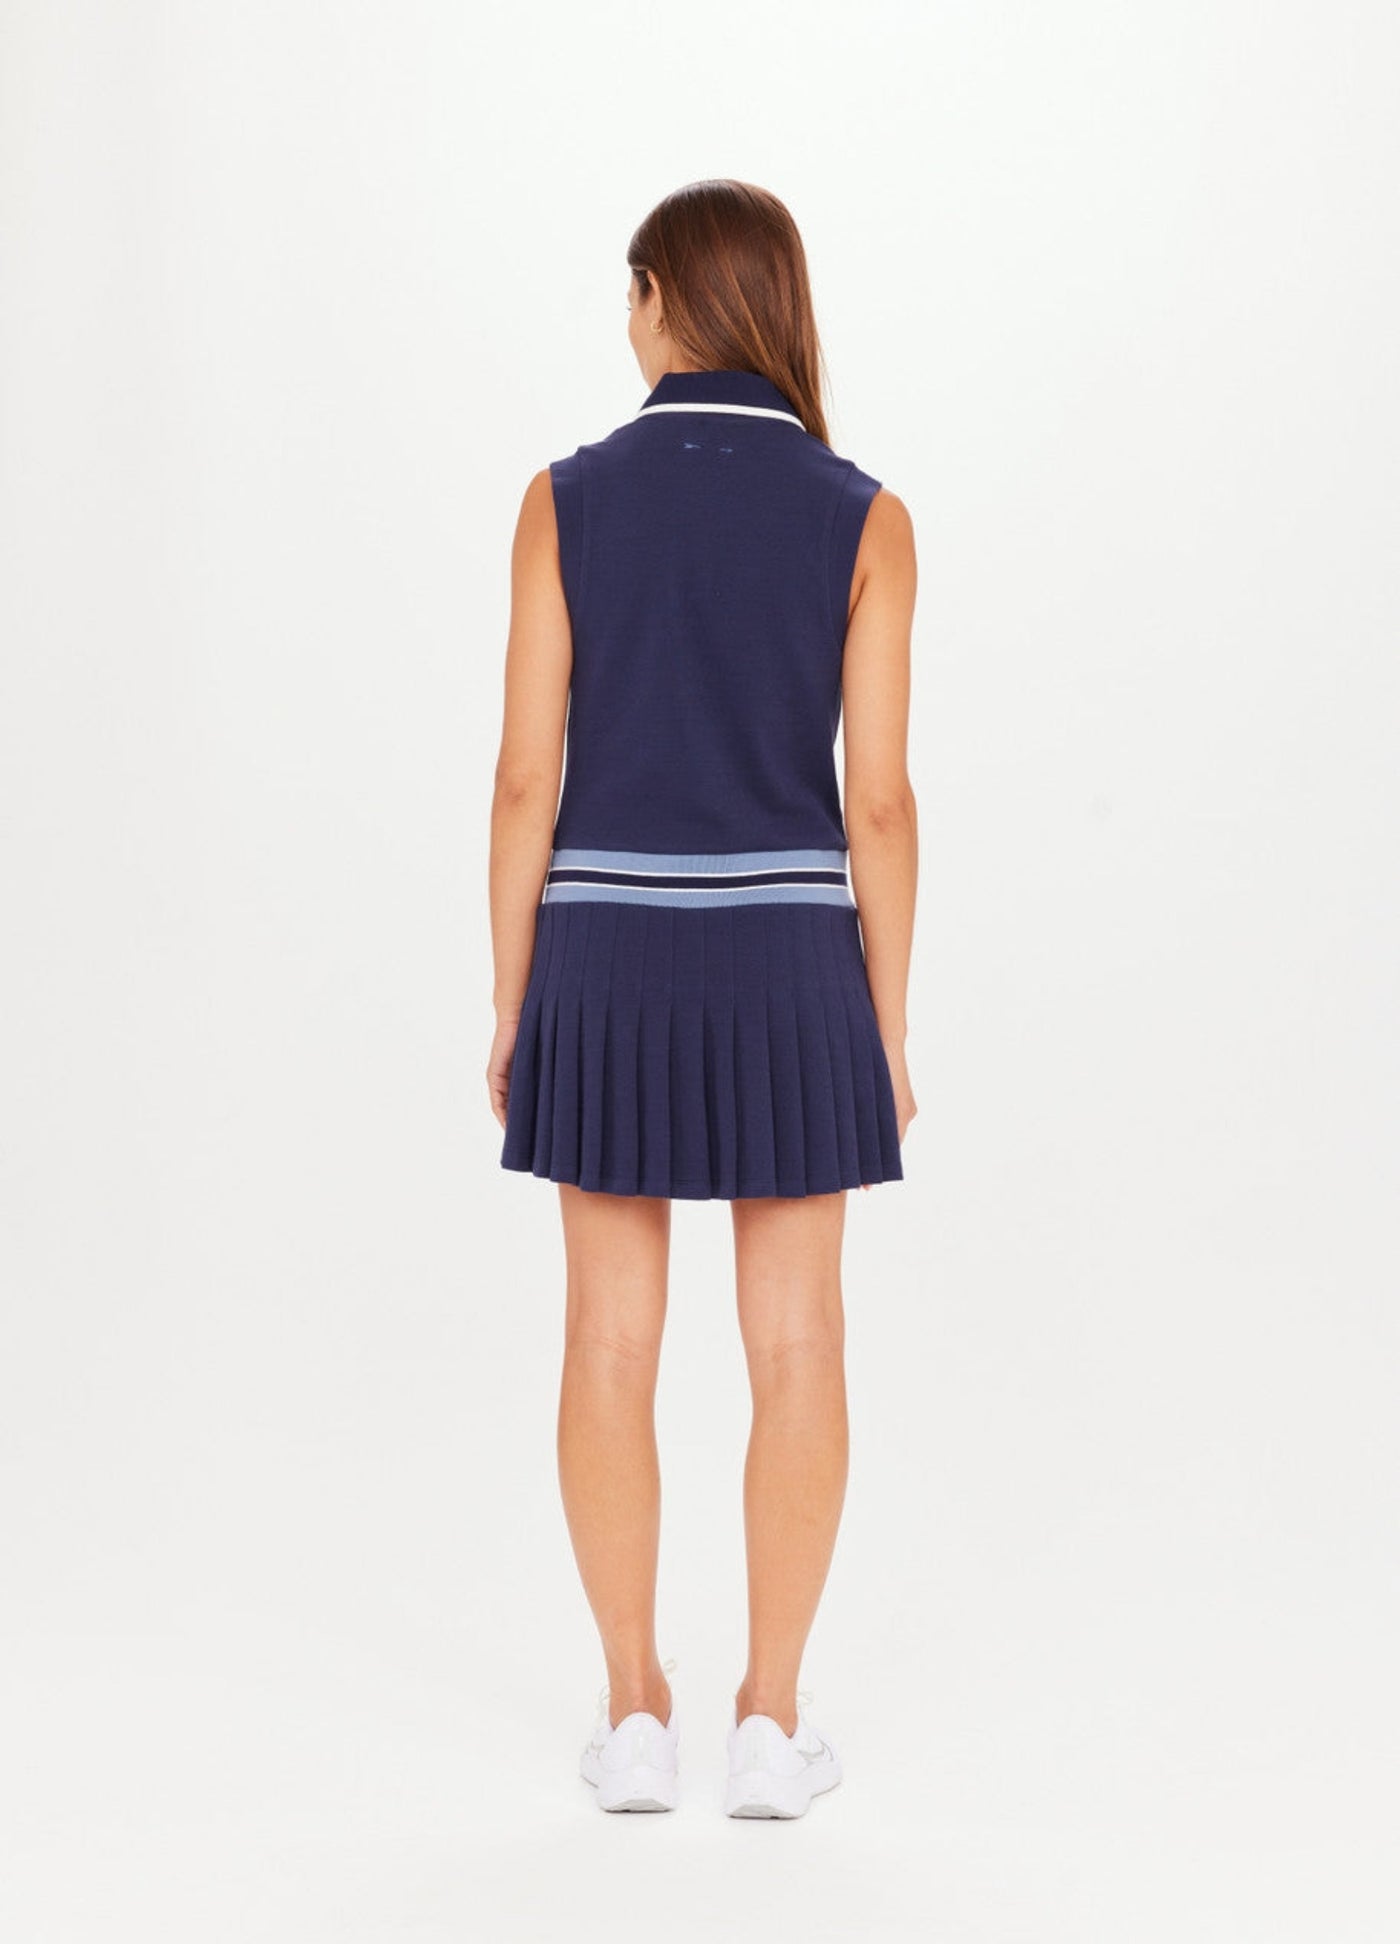 Navy blue tennis dress with button through and stand collar featuring a pleated skirt